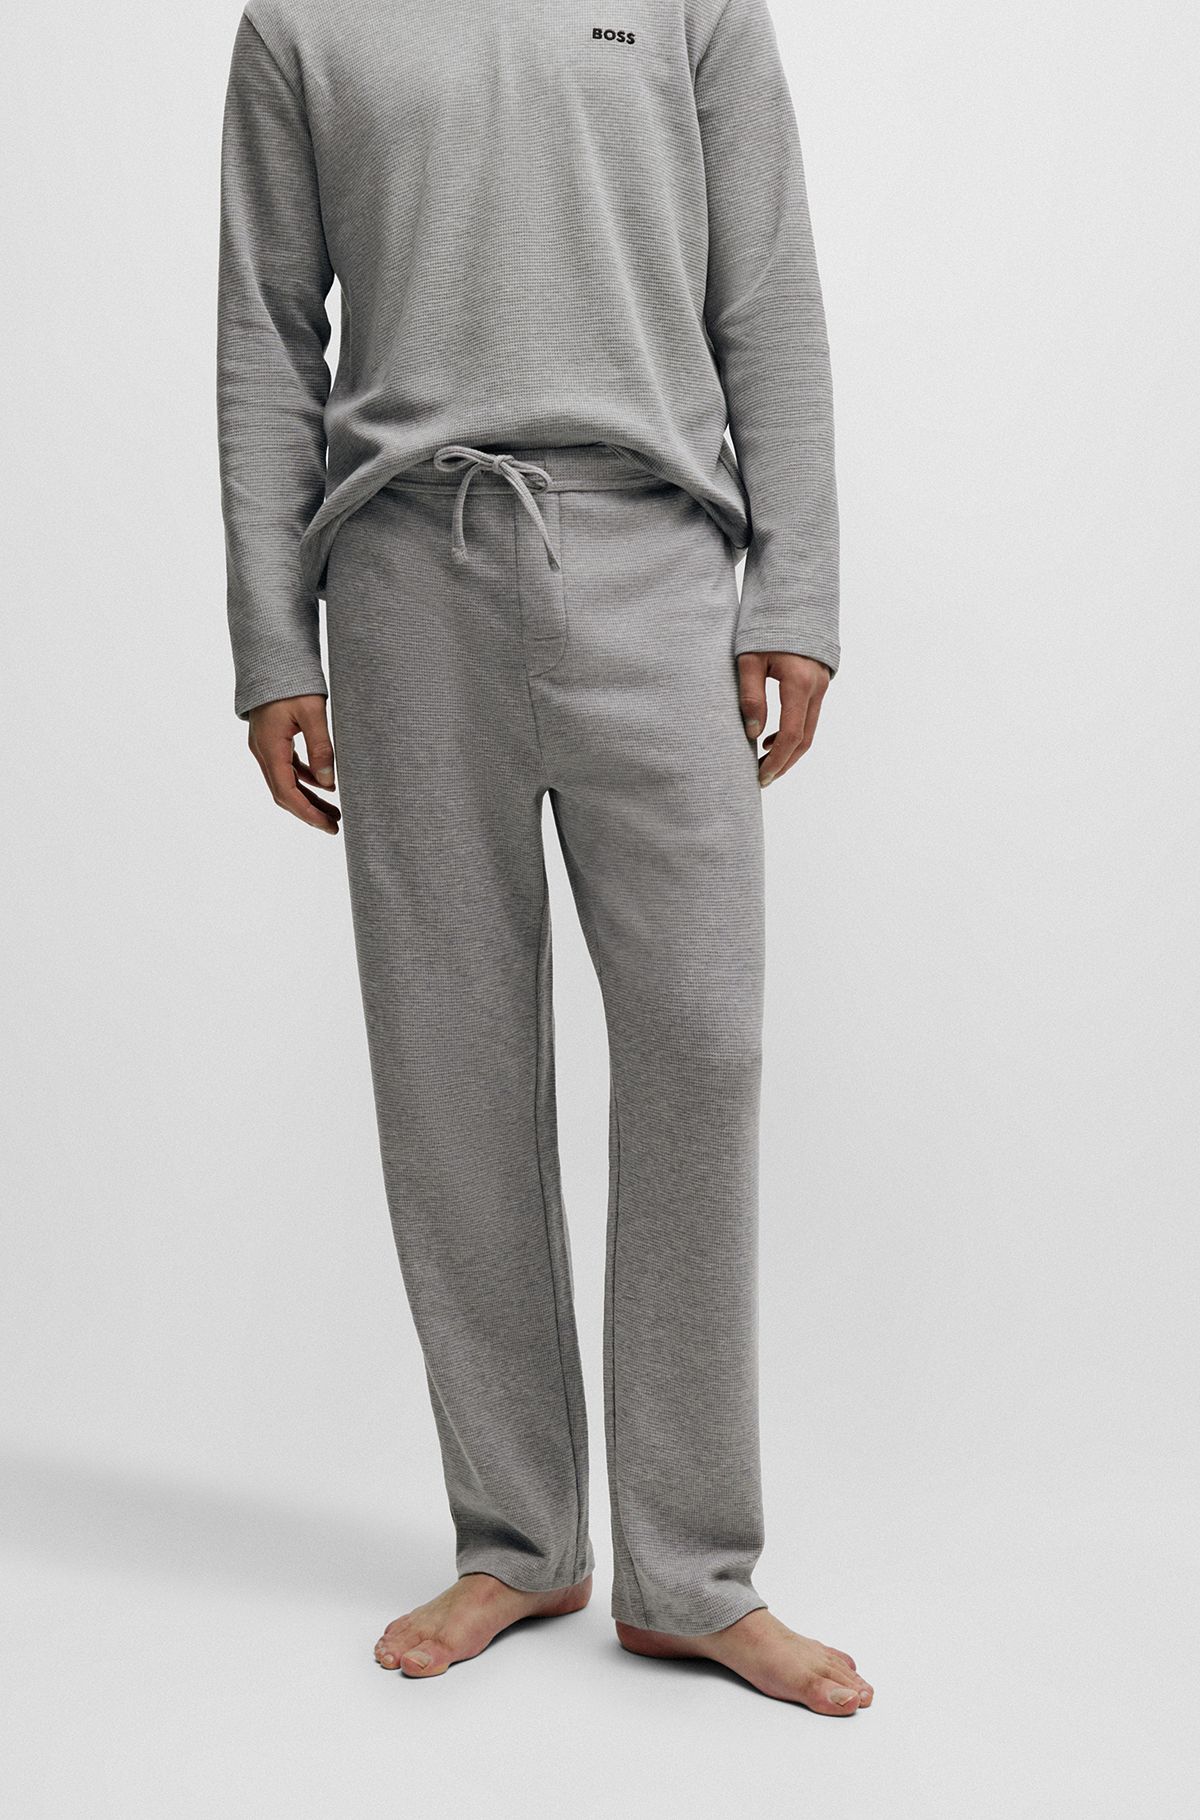 HUGO BOSS nightwear for men | Comfortable and high quality